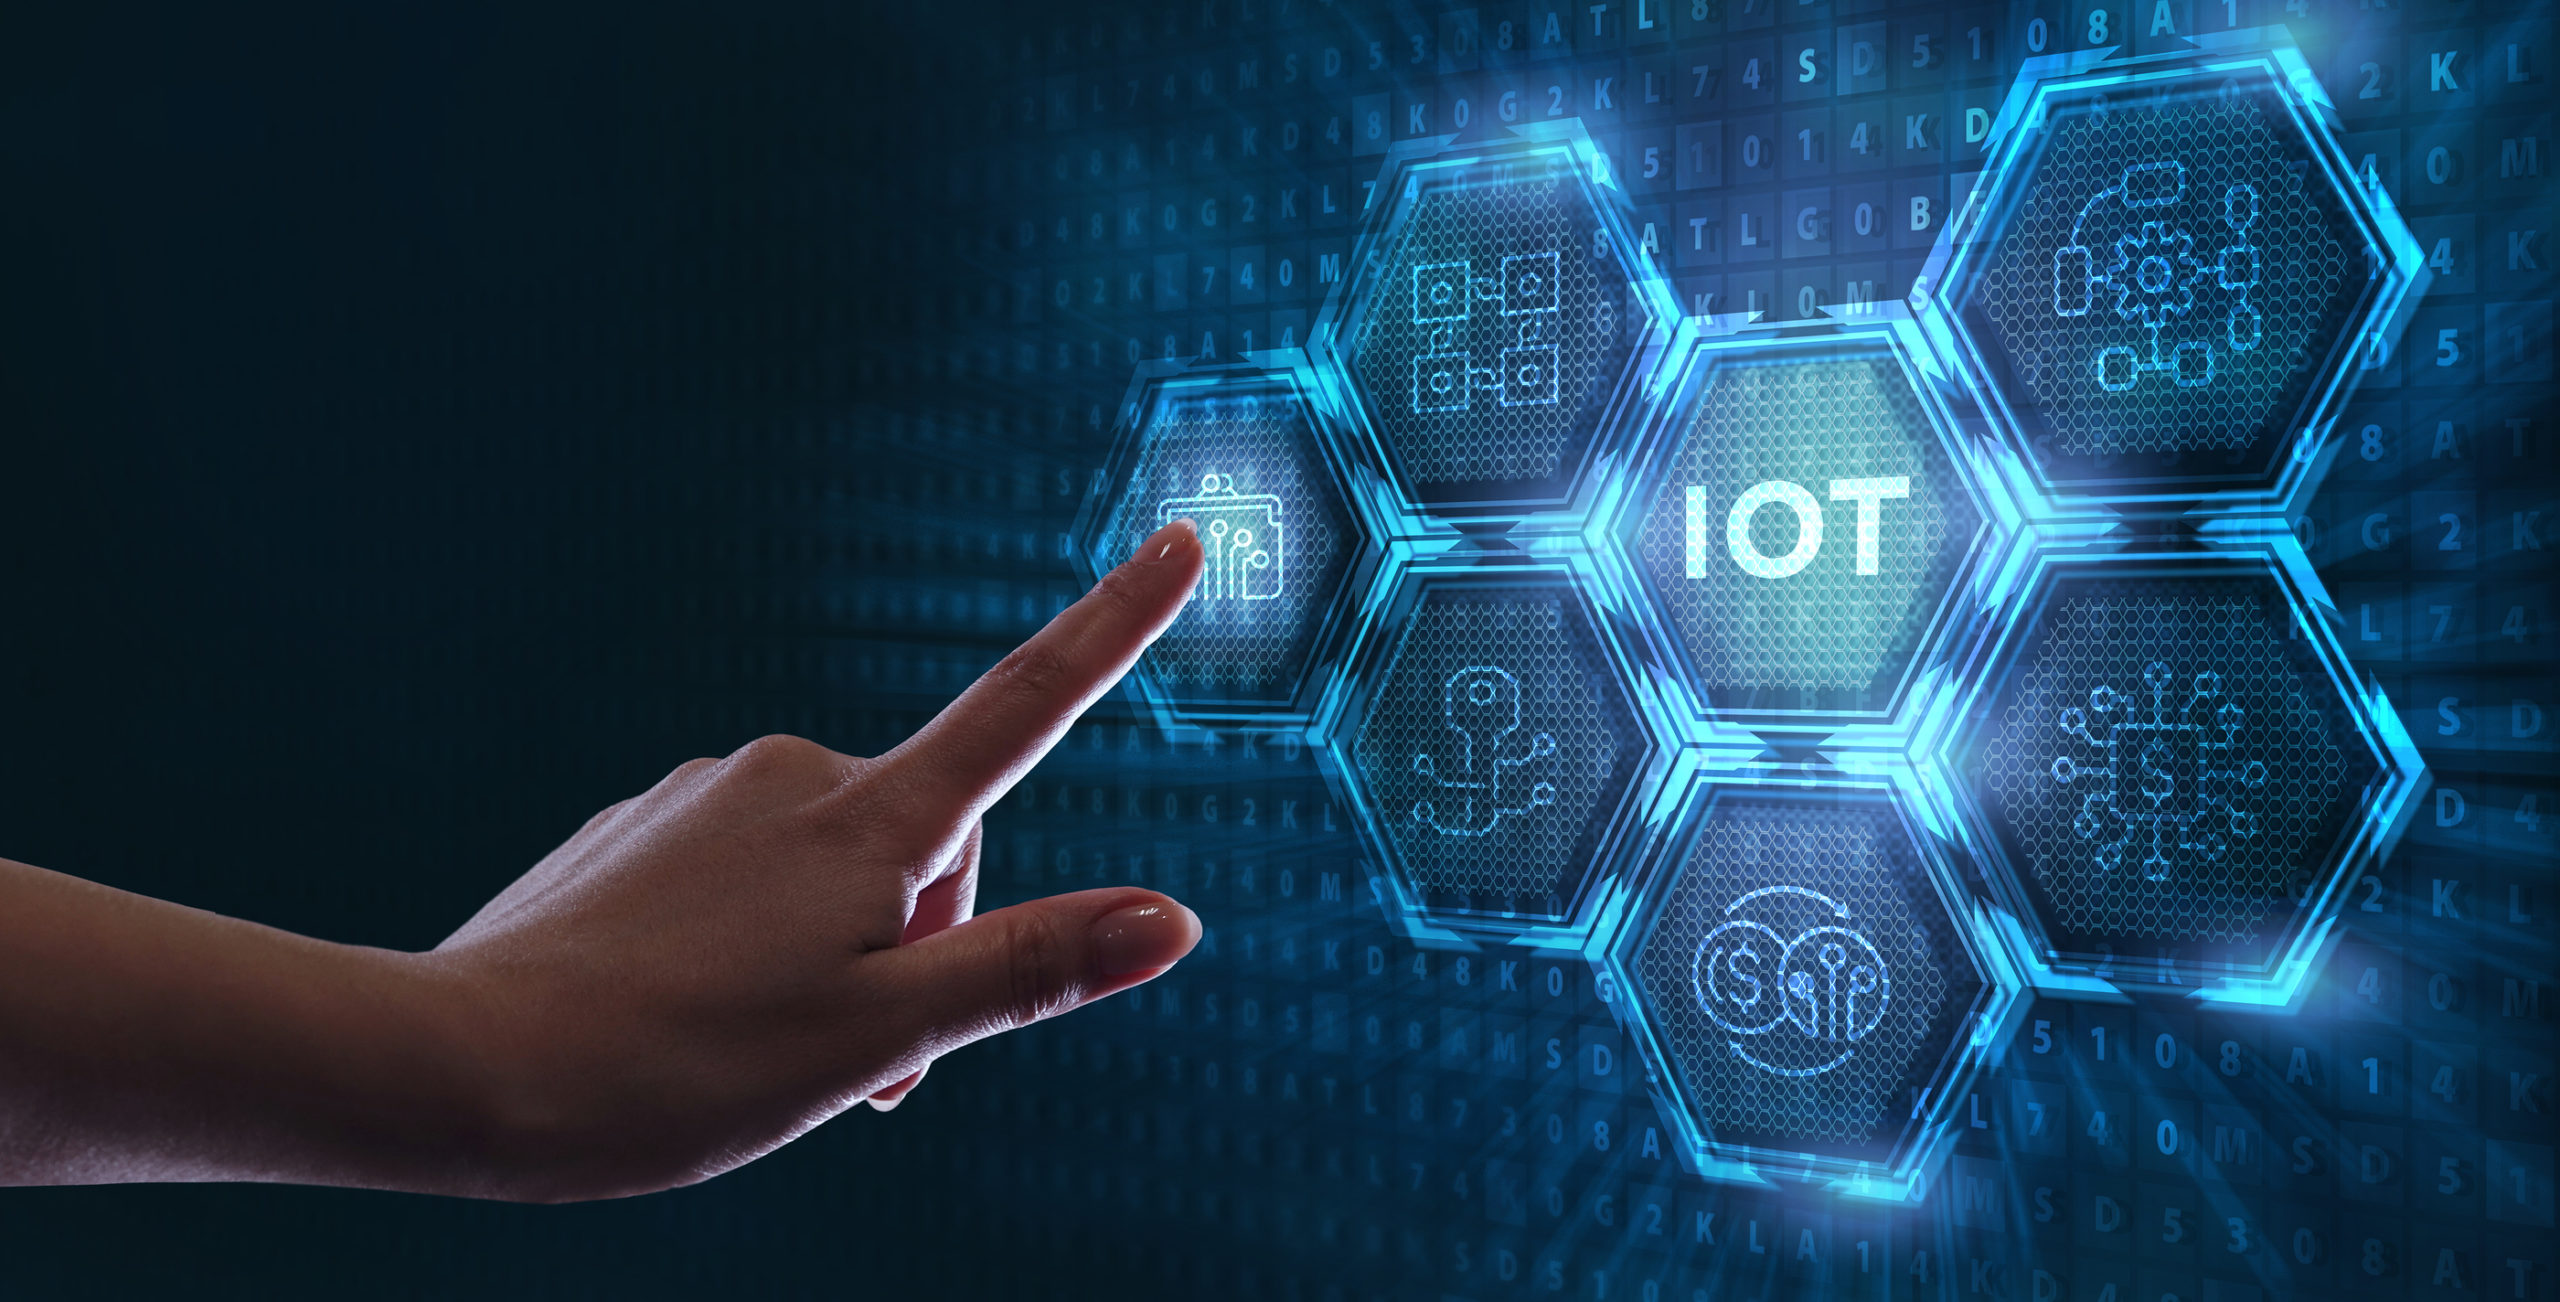 How to Handle IoT on Your Business Networks